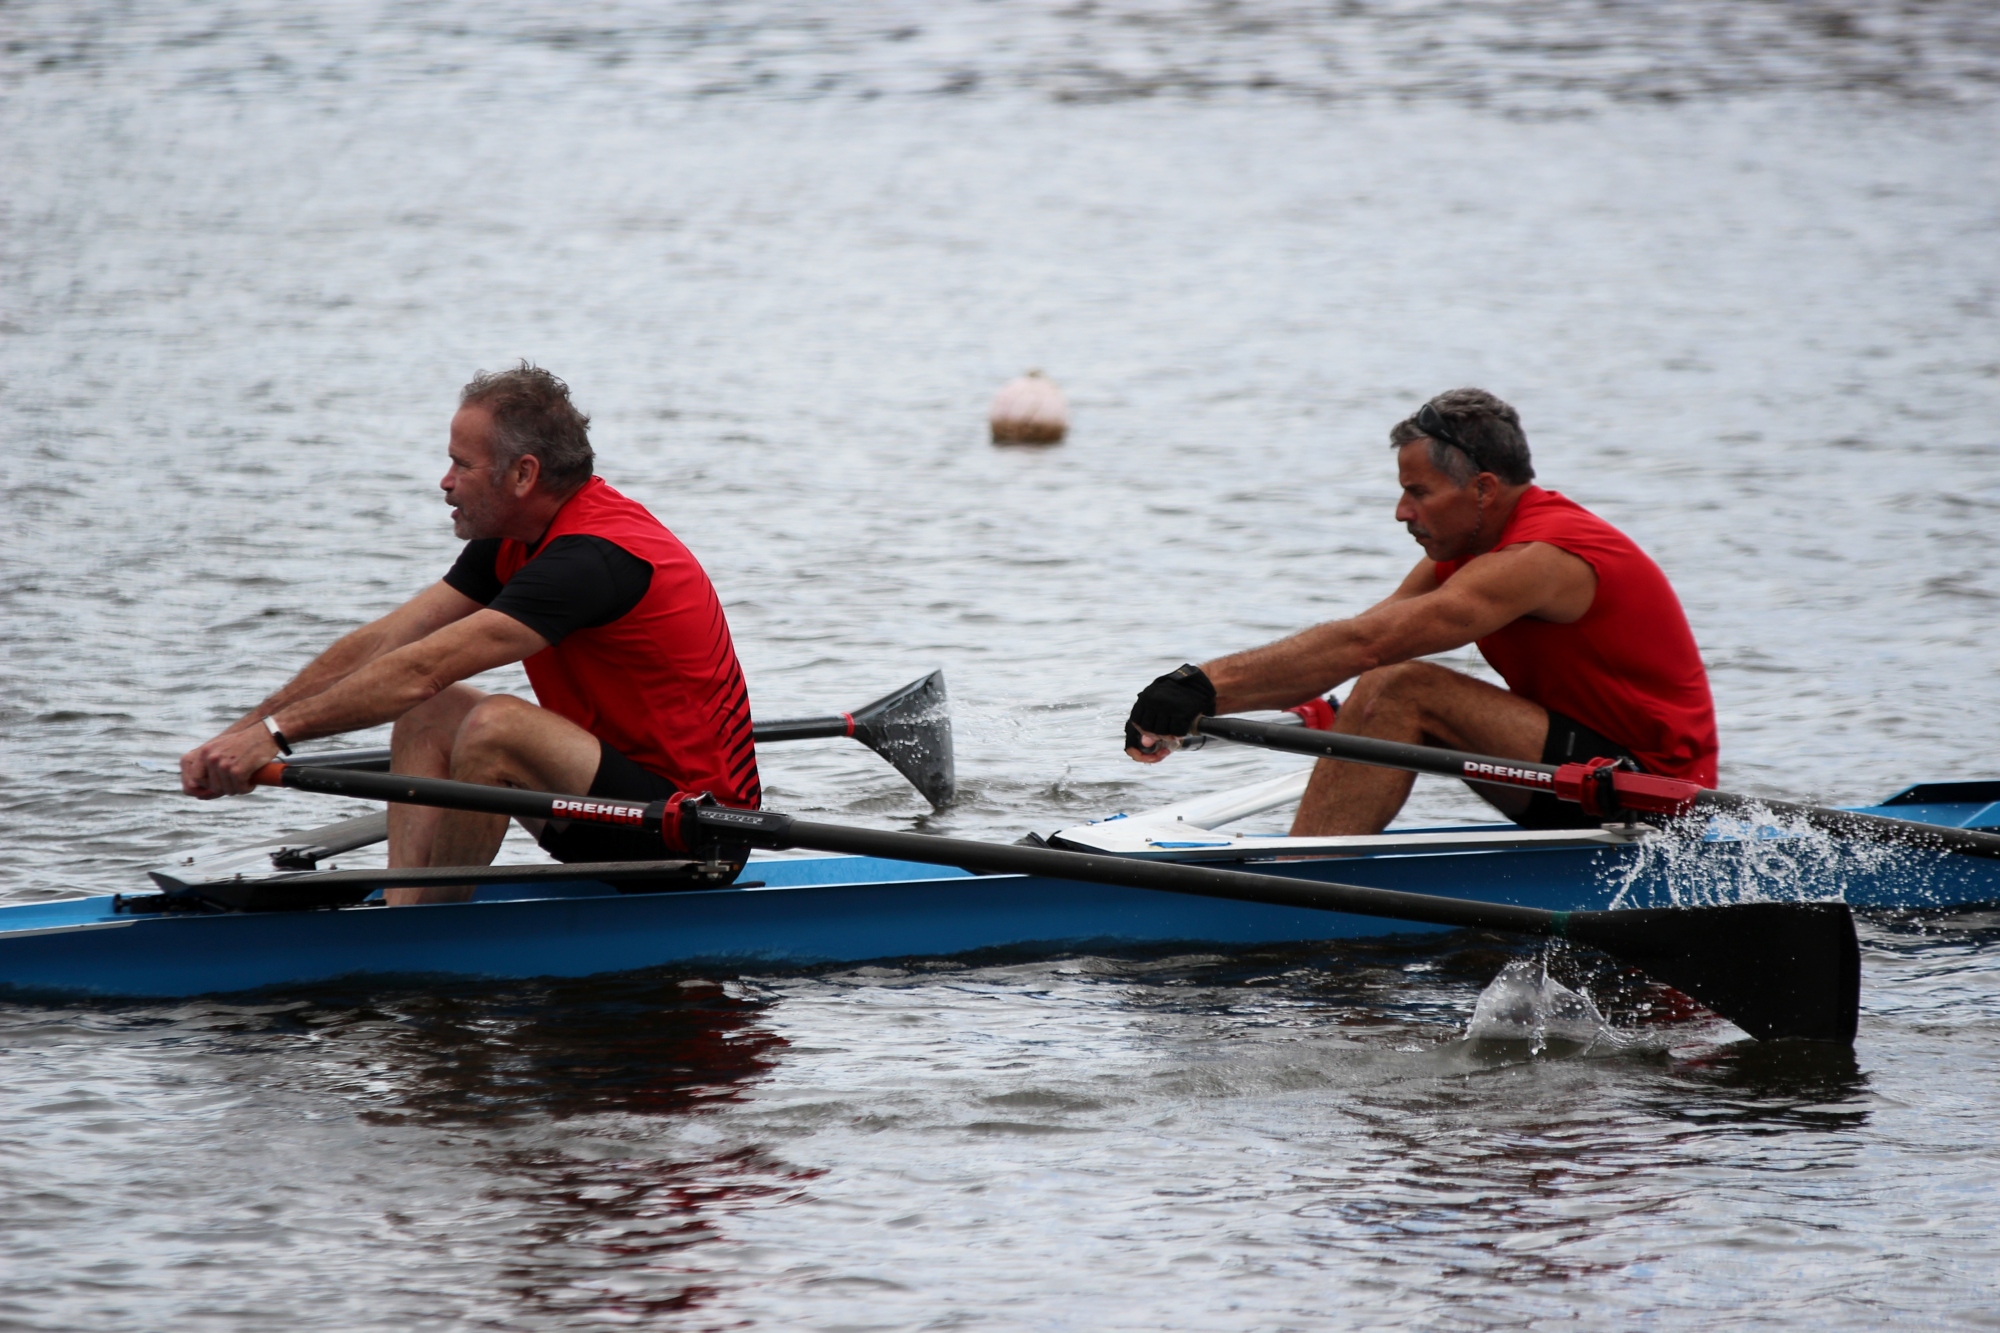 Randy Kernon and Mark Tofal  are experienced scullers who went to the Olympic trials together.